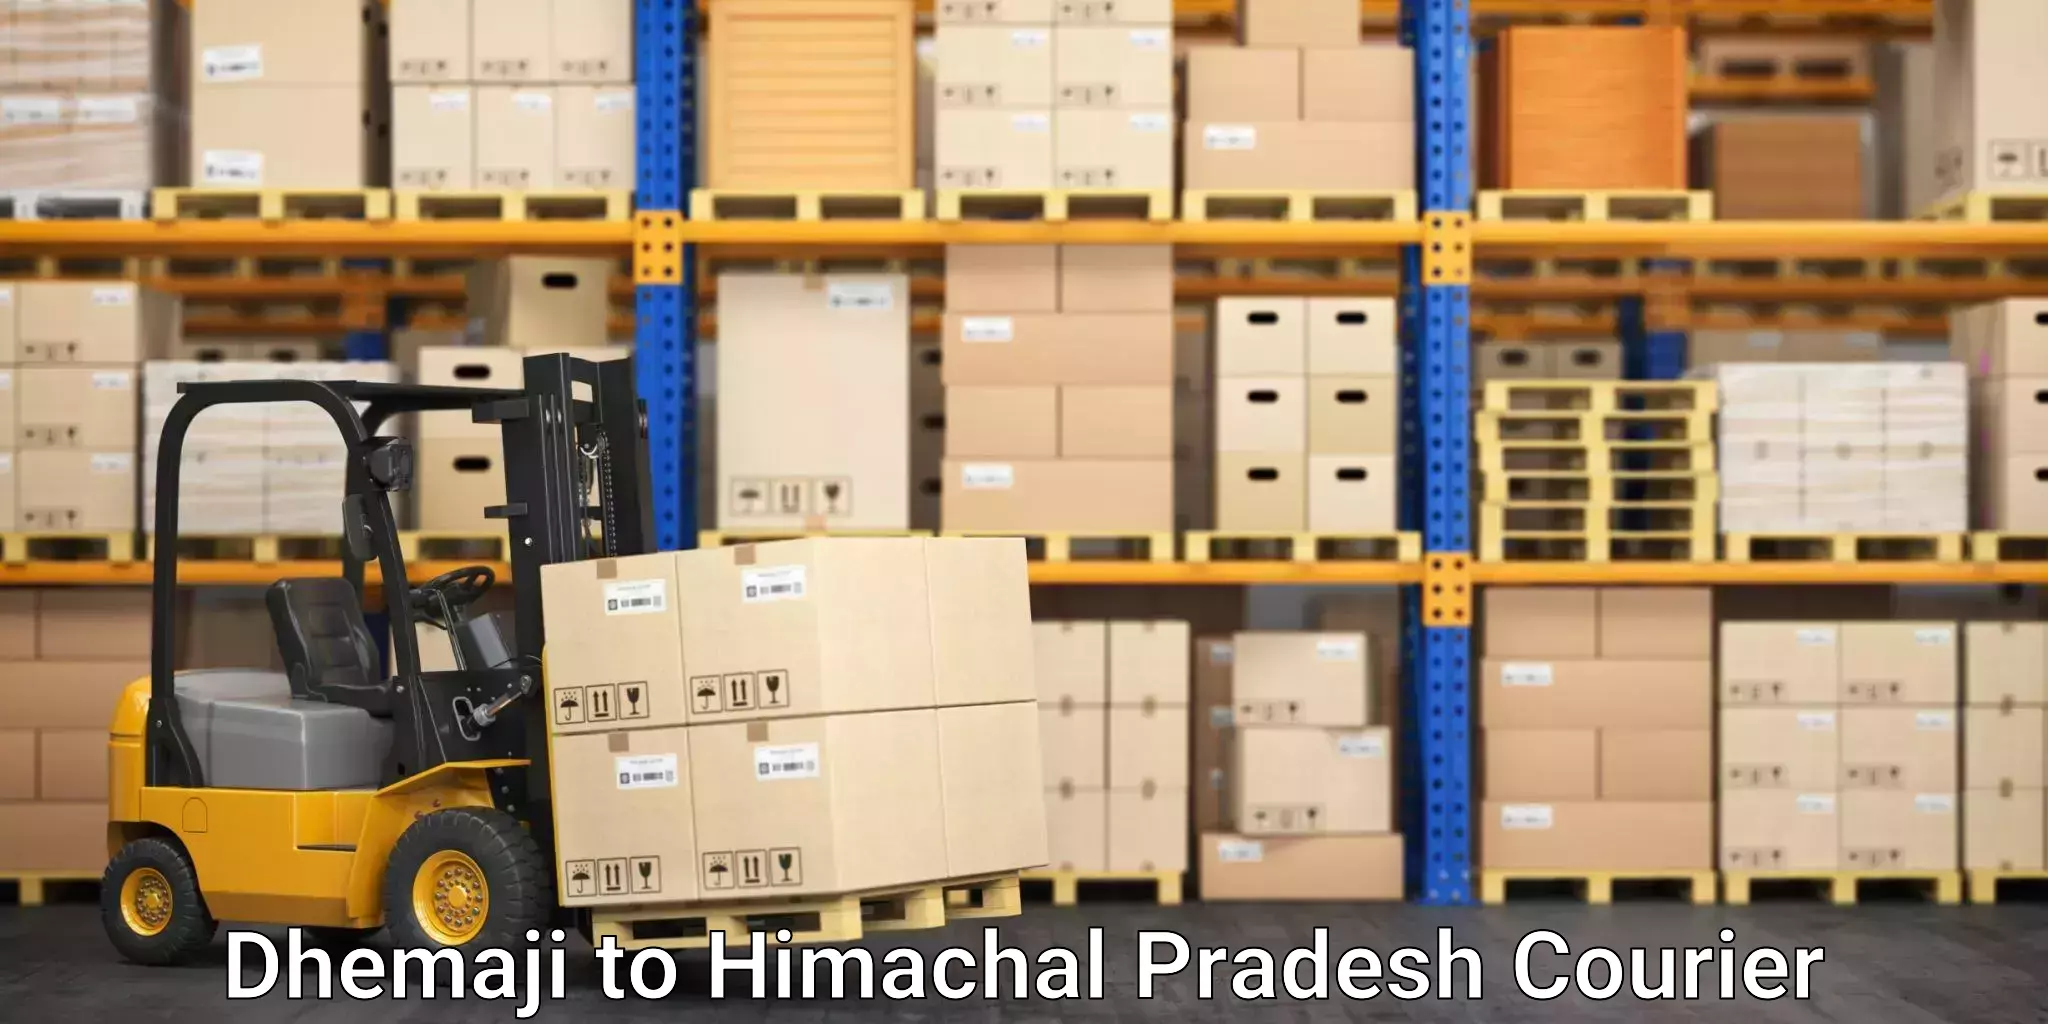 Efficient order fulfillment Dhemaji to Darlaghat